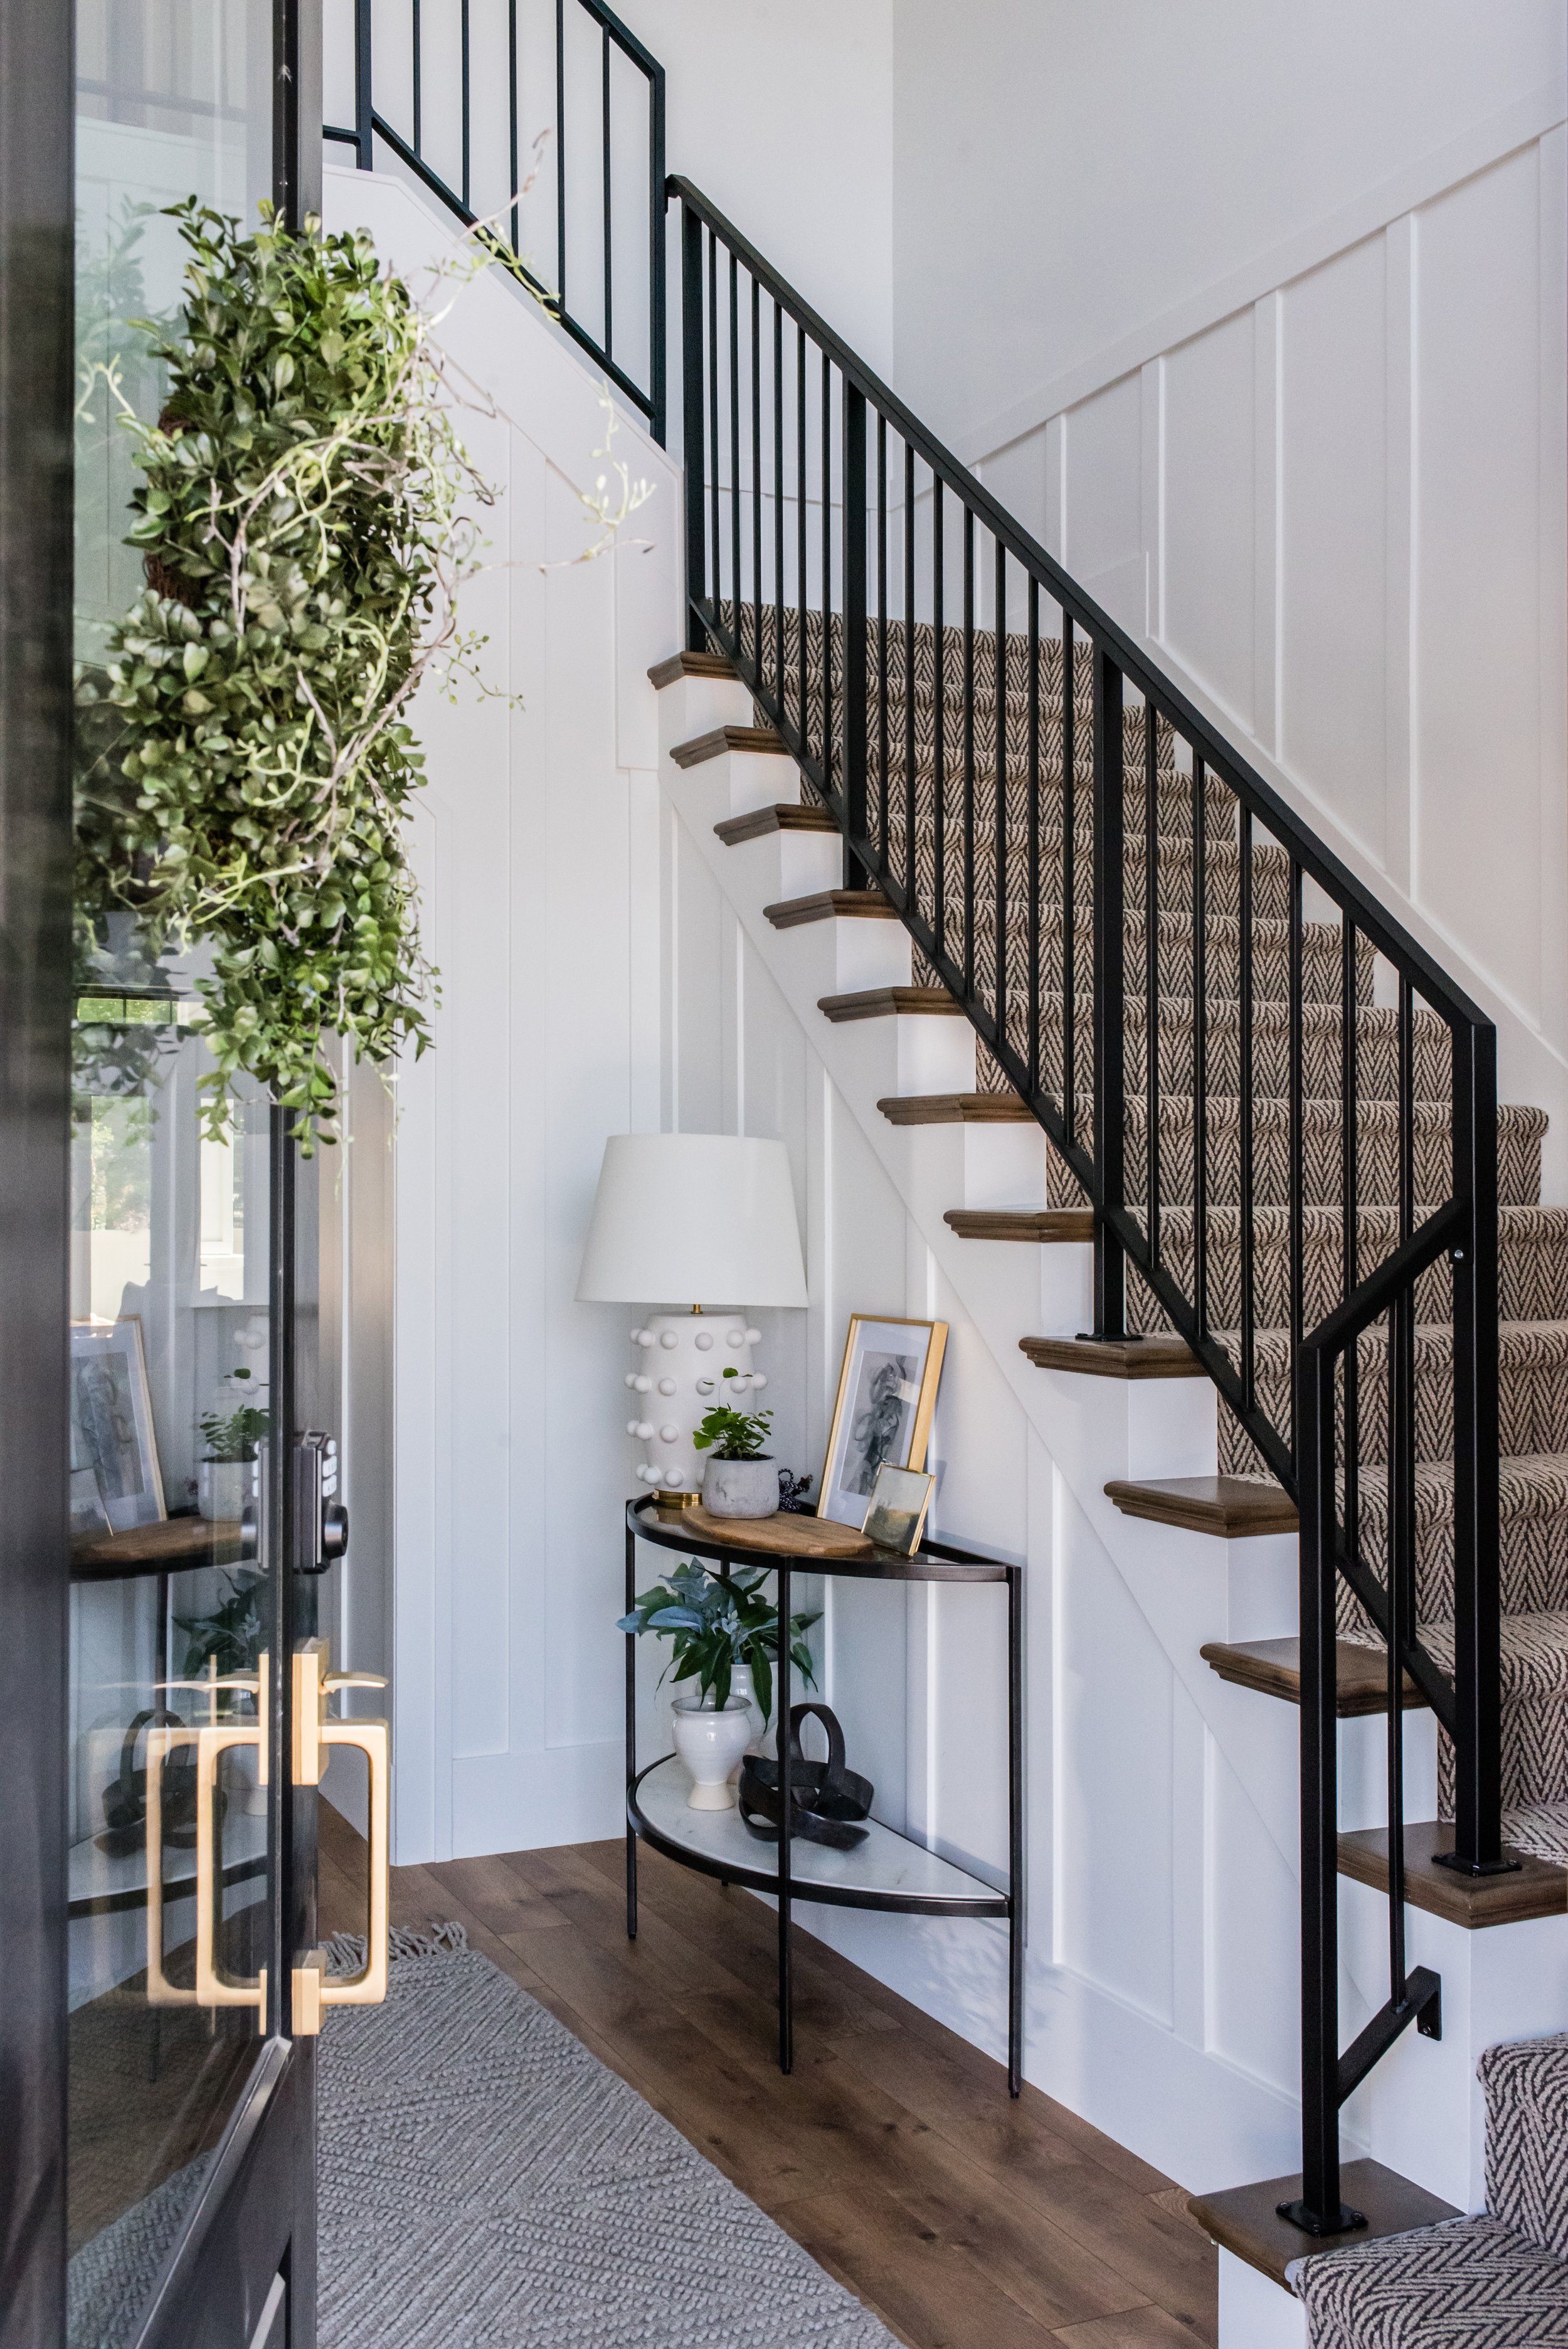  The open design of this foyer uses the stairway to draw the eyes upward and focus on the high ceilings and openness of the room. Open design foyer exposed staircase black and white #opendesignstairway #unobstructedview #grandstaircase 